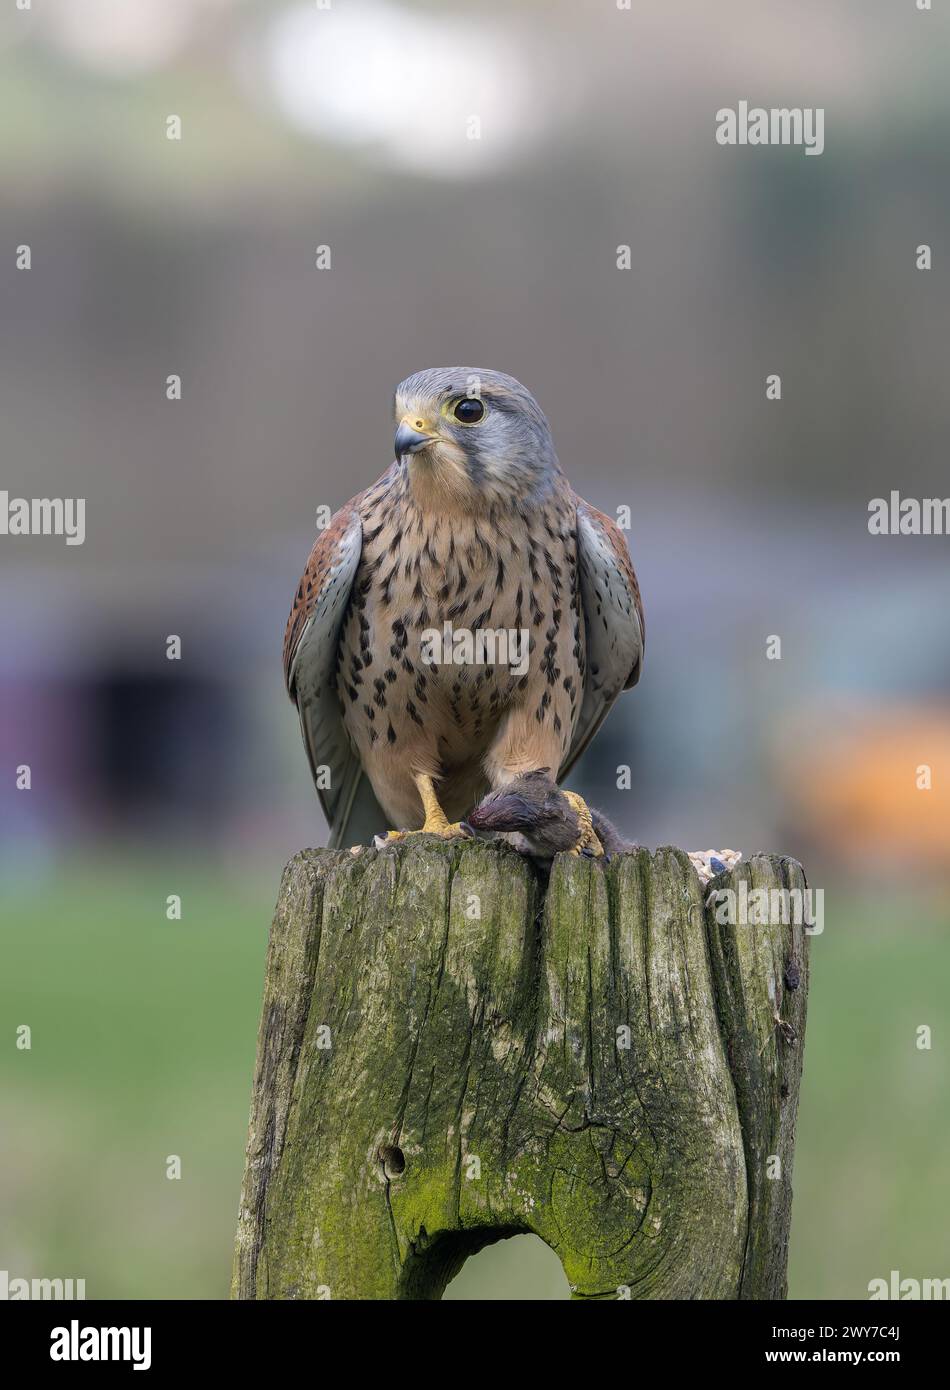 Male Kestrel, Falco Tinnunculus, perched on a gate post Stock Photo